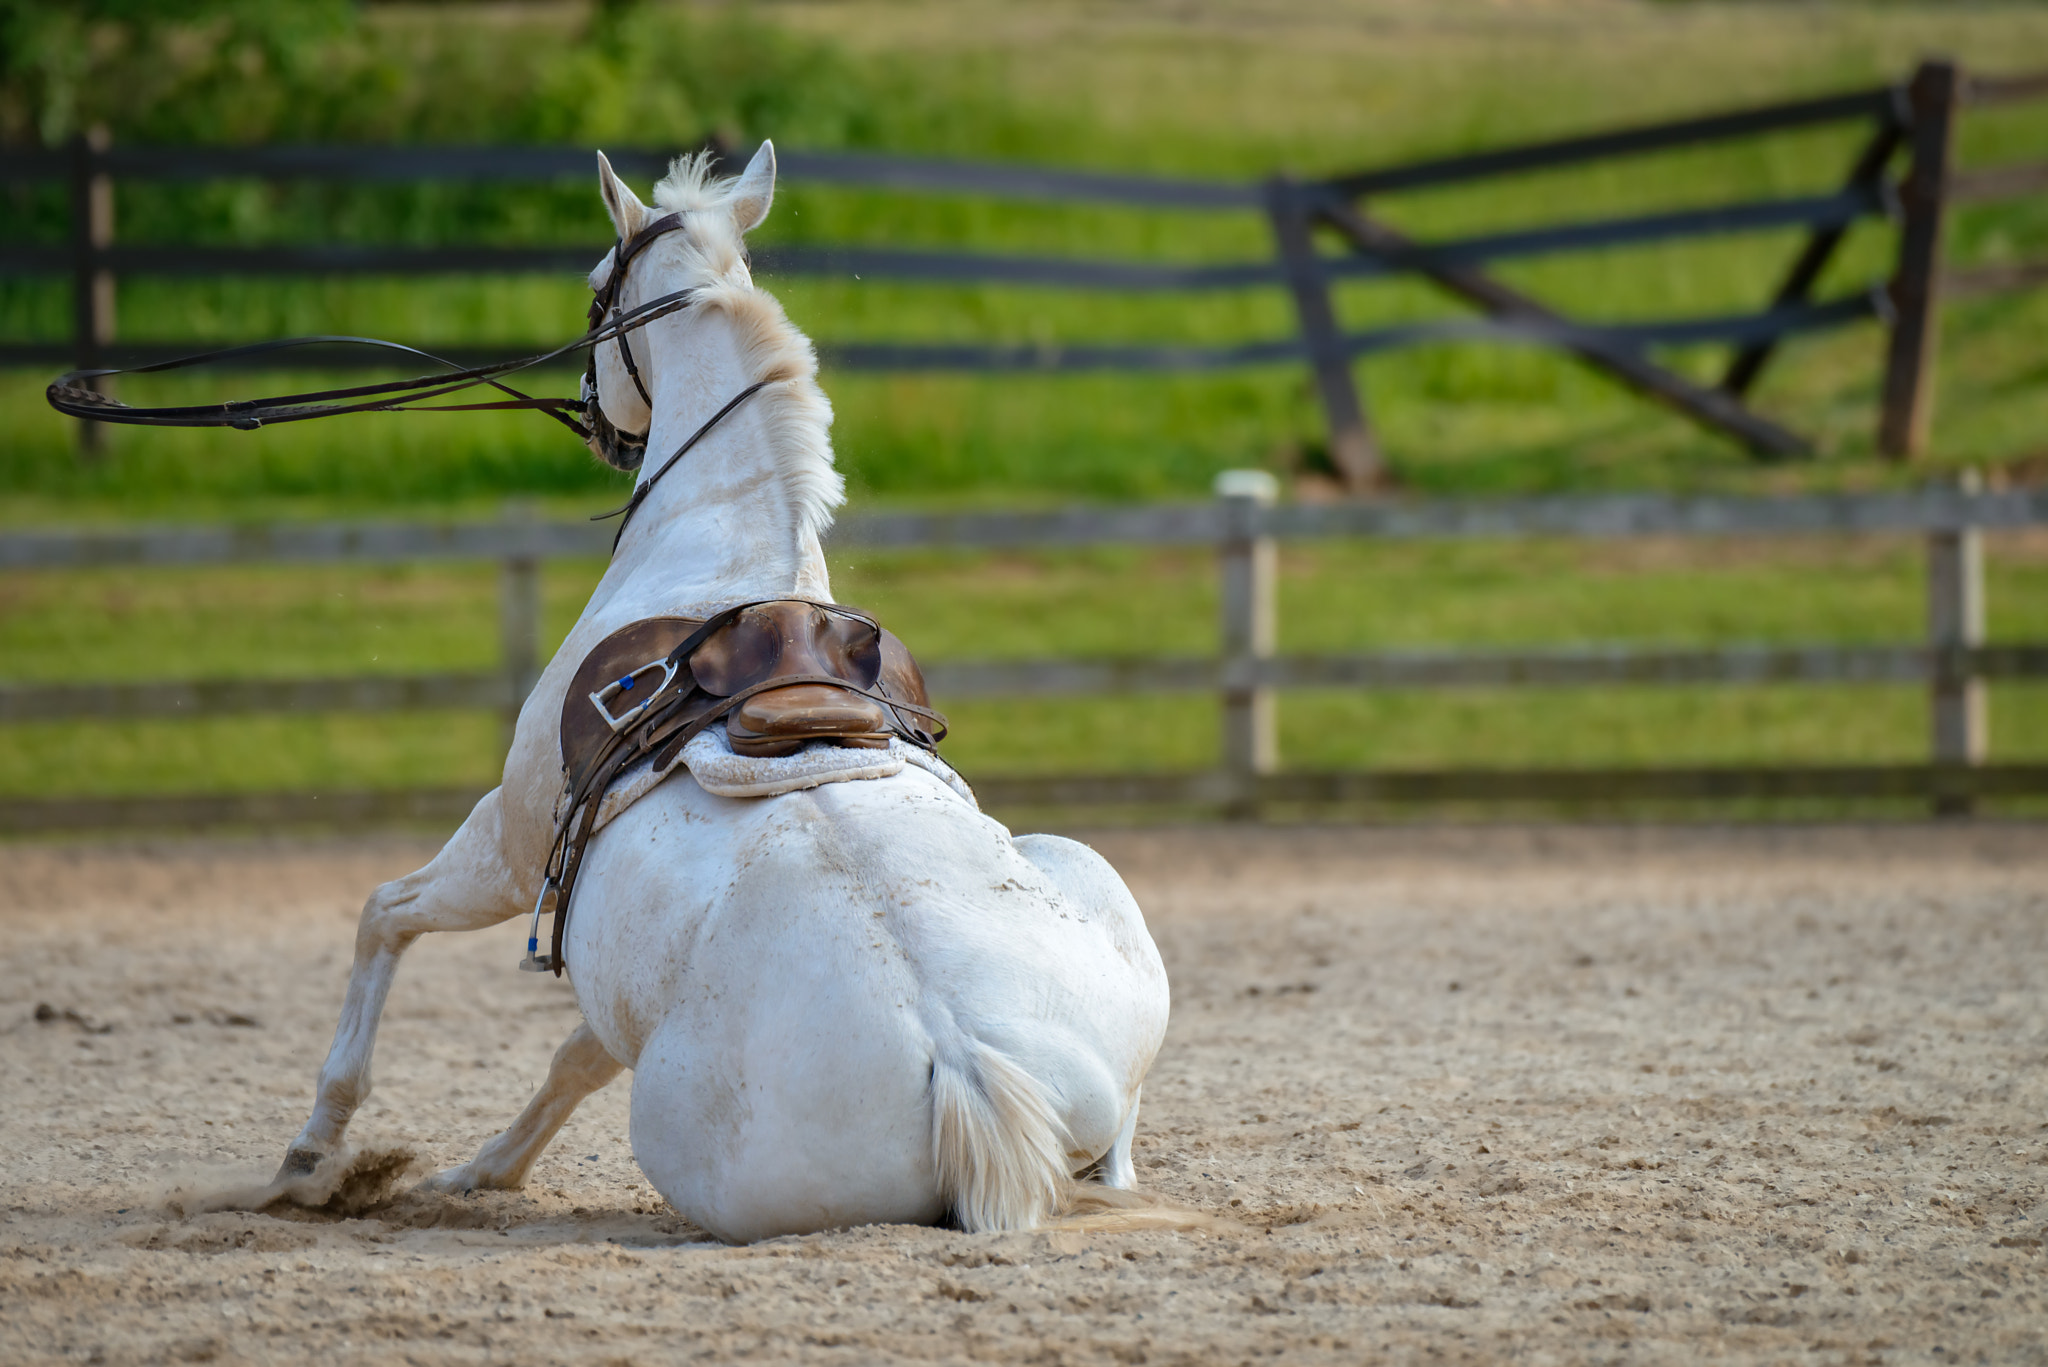 Nikon D800 sample photo. Saddled horse tries to get up from the ground photography